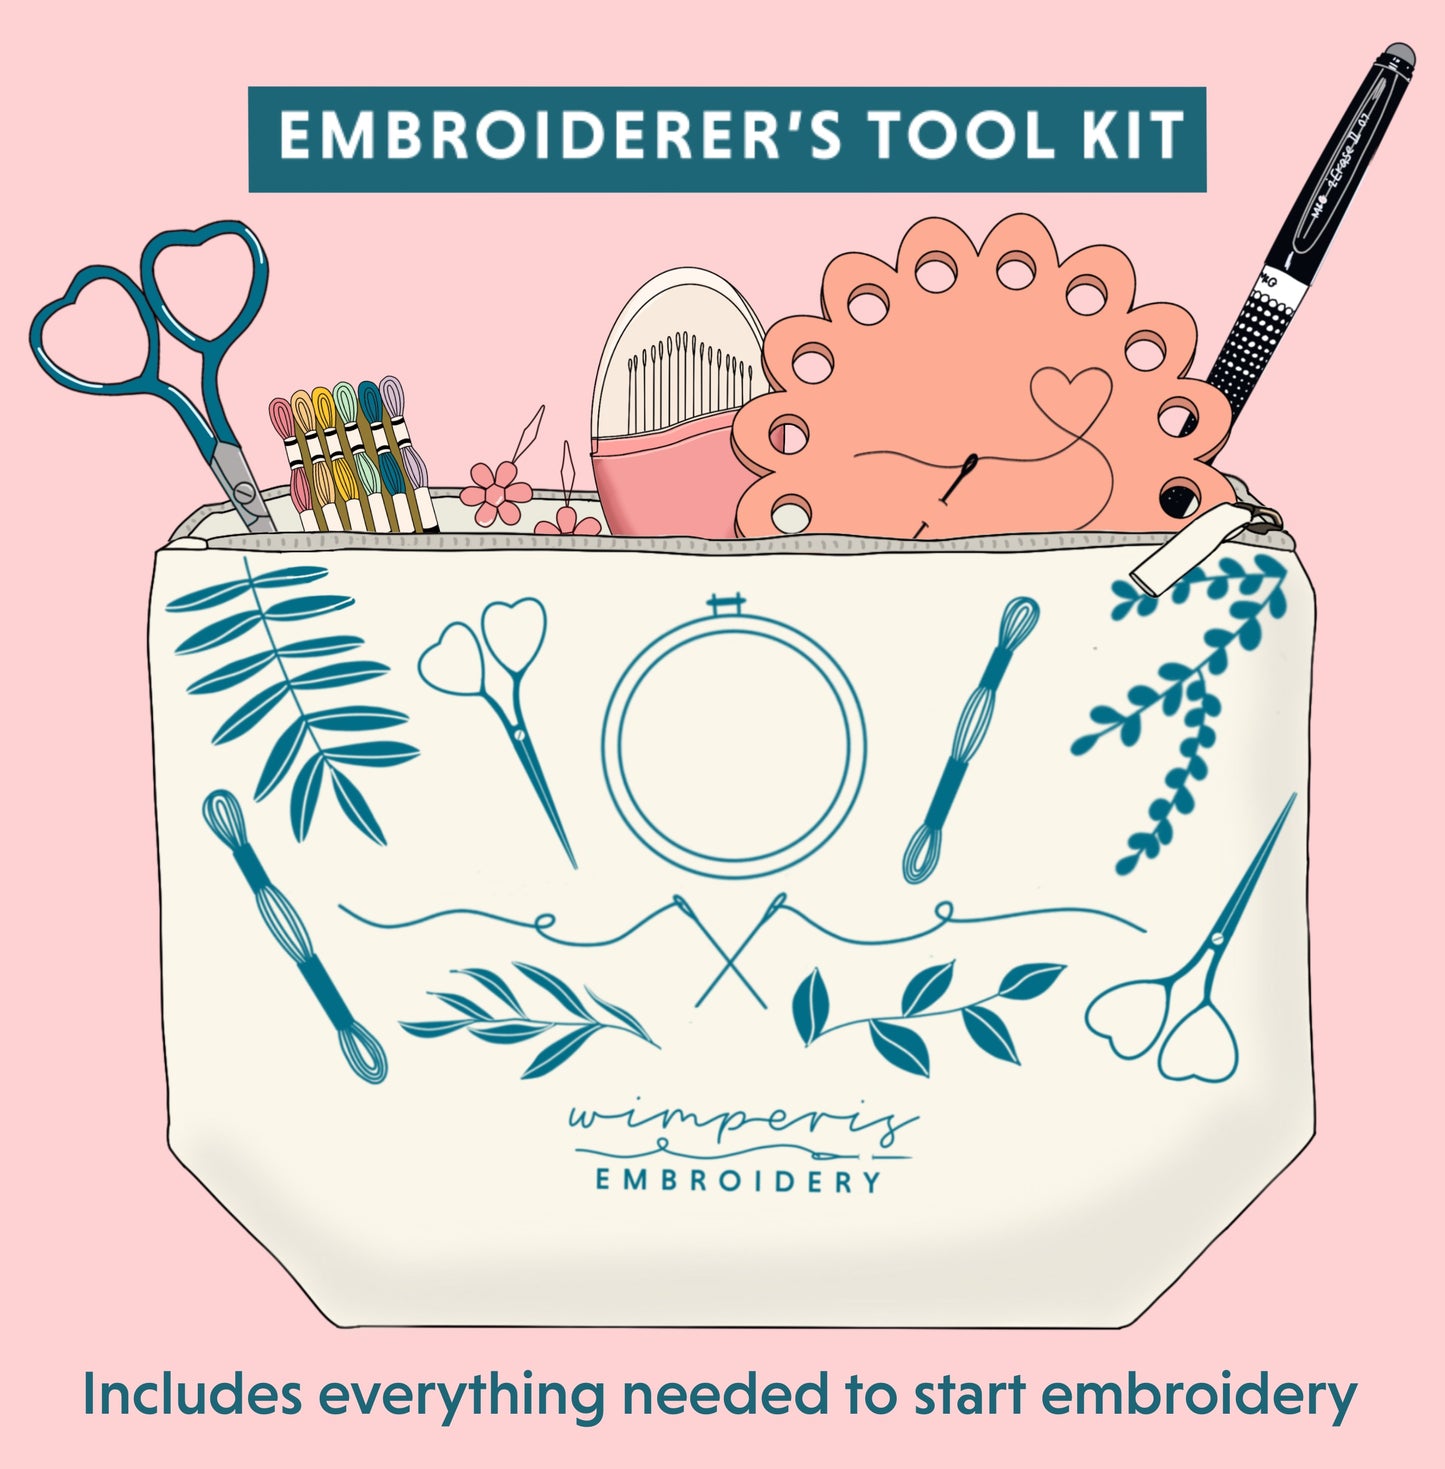 The Embroiderer’s Tool Kit